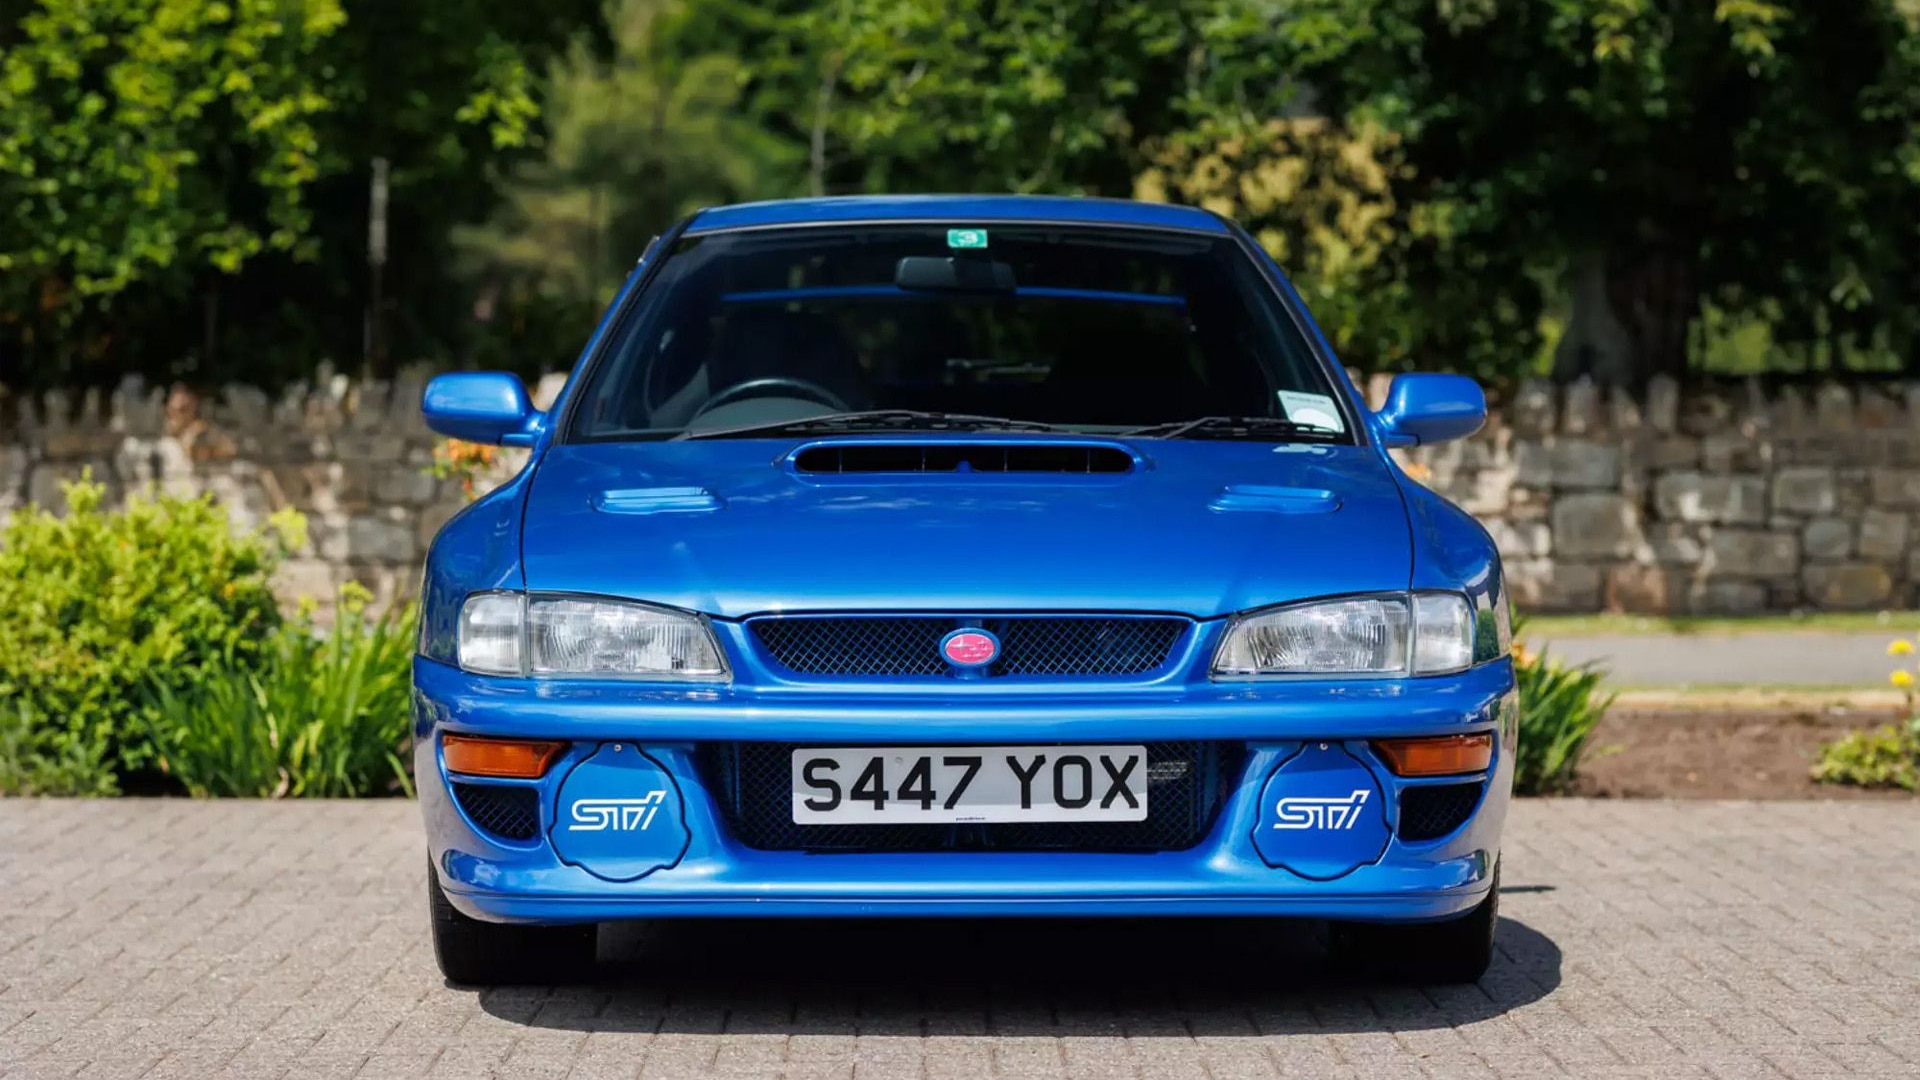 1998 Subaru Impreza STI 22B prototype once owned by Colin McRae - Photo credit: Iconic Auctioneers